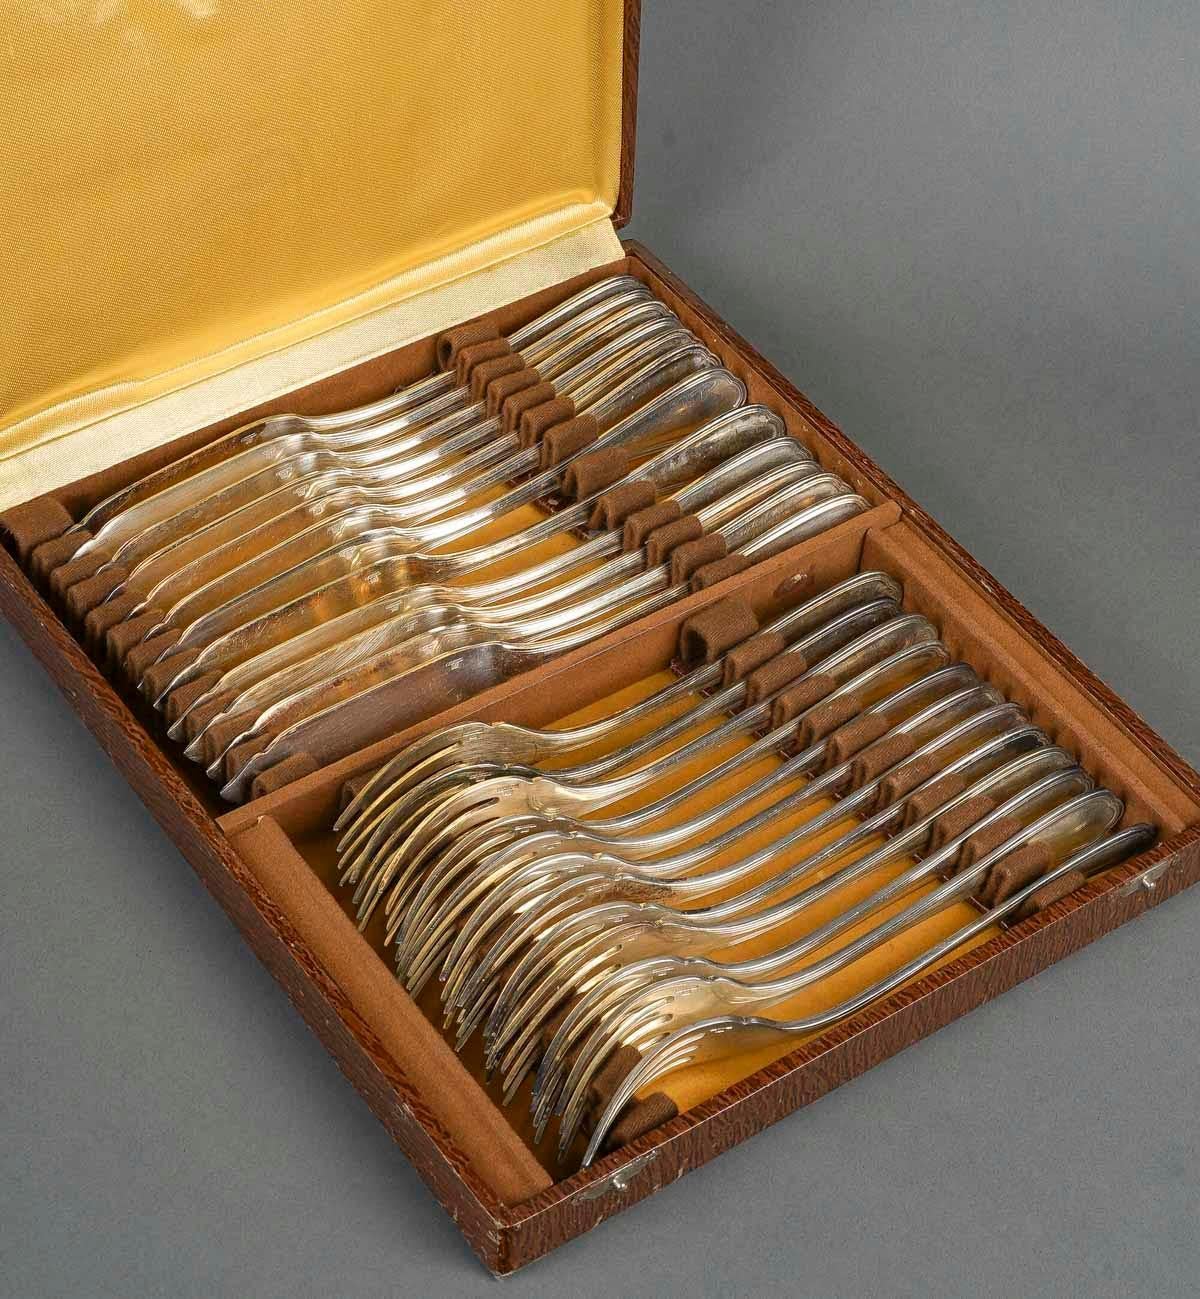 Fish service with 12 forks and 12 fish knives by the silversmith Christofle in Paris, 1960-1970.

Fish service with 12 silver plated forks and 12 fish knives in the original box by Christofle Goldsmith in Paris, 1960-1970.
Box: H: 4cm, W: 23cm, D: